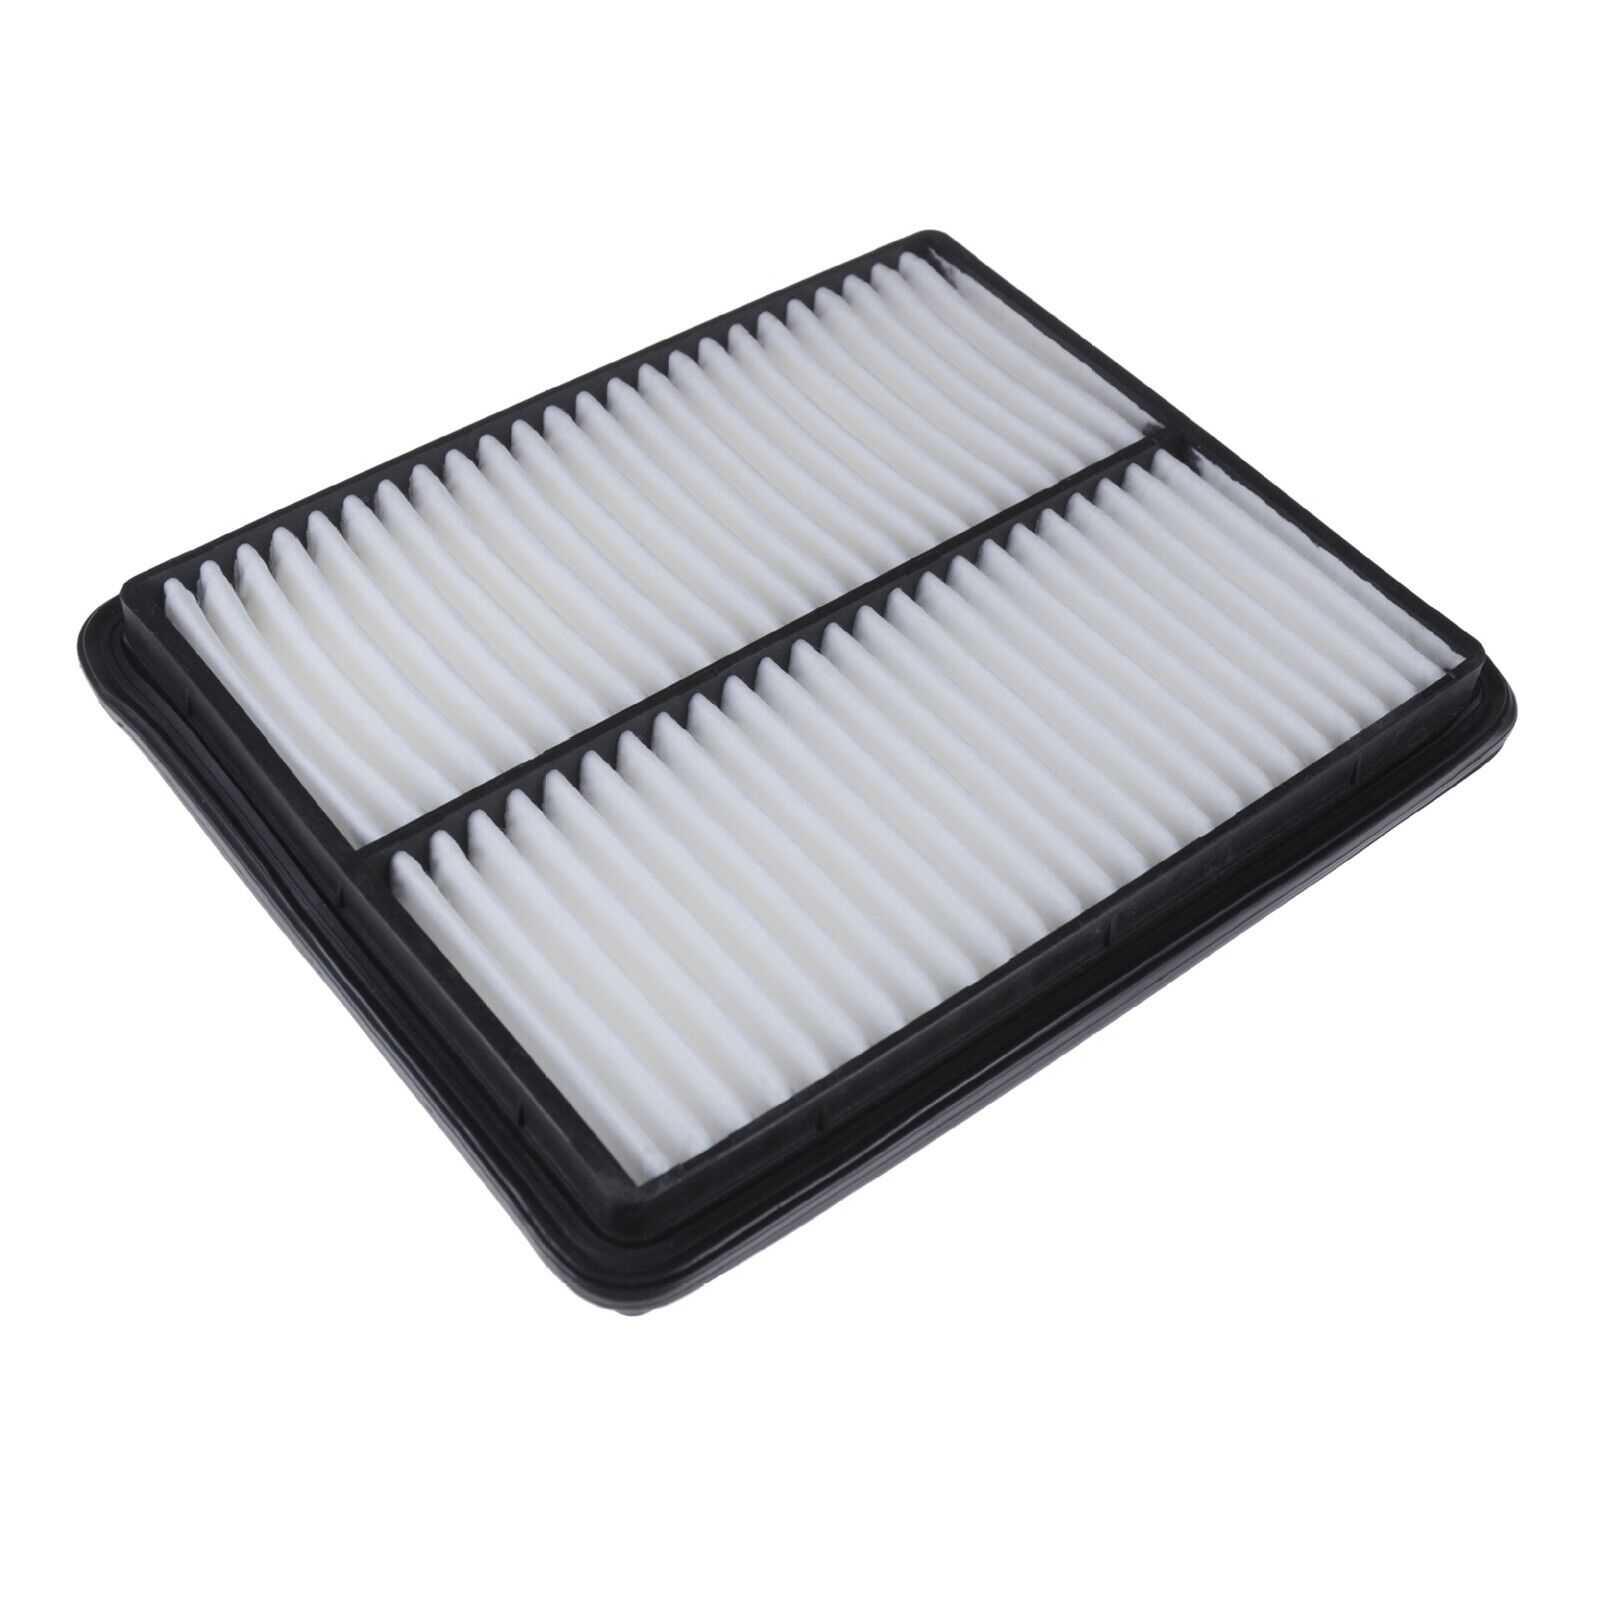 Blue Print Air Filter ADG02220 - High Quality OE Replacement For Daewoo Nubira